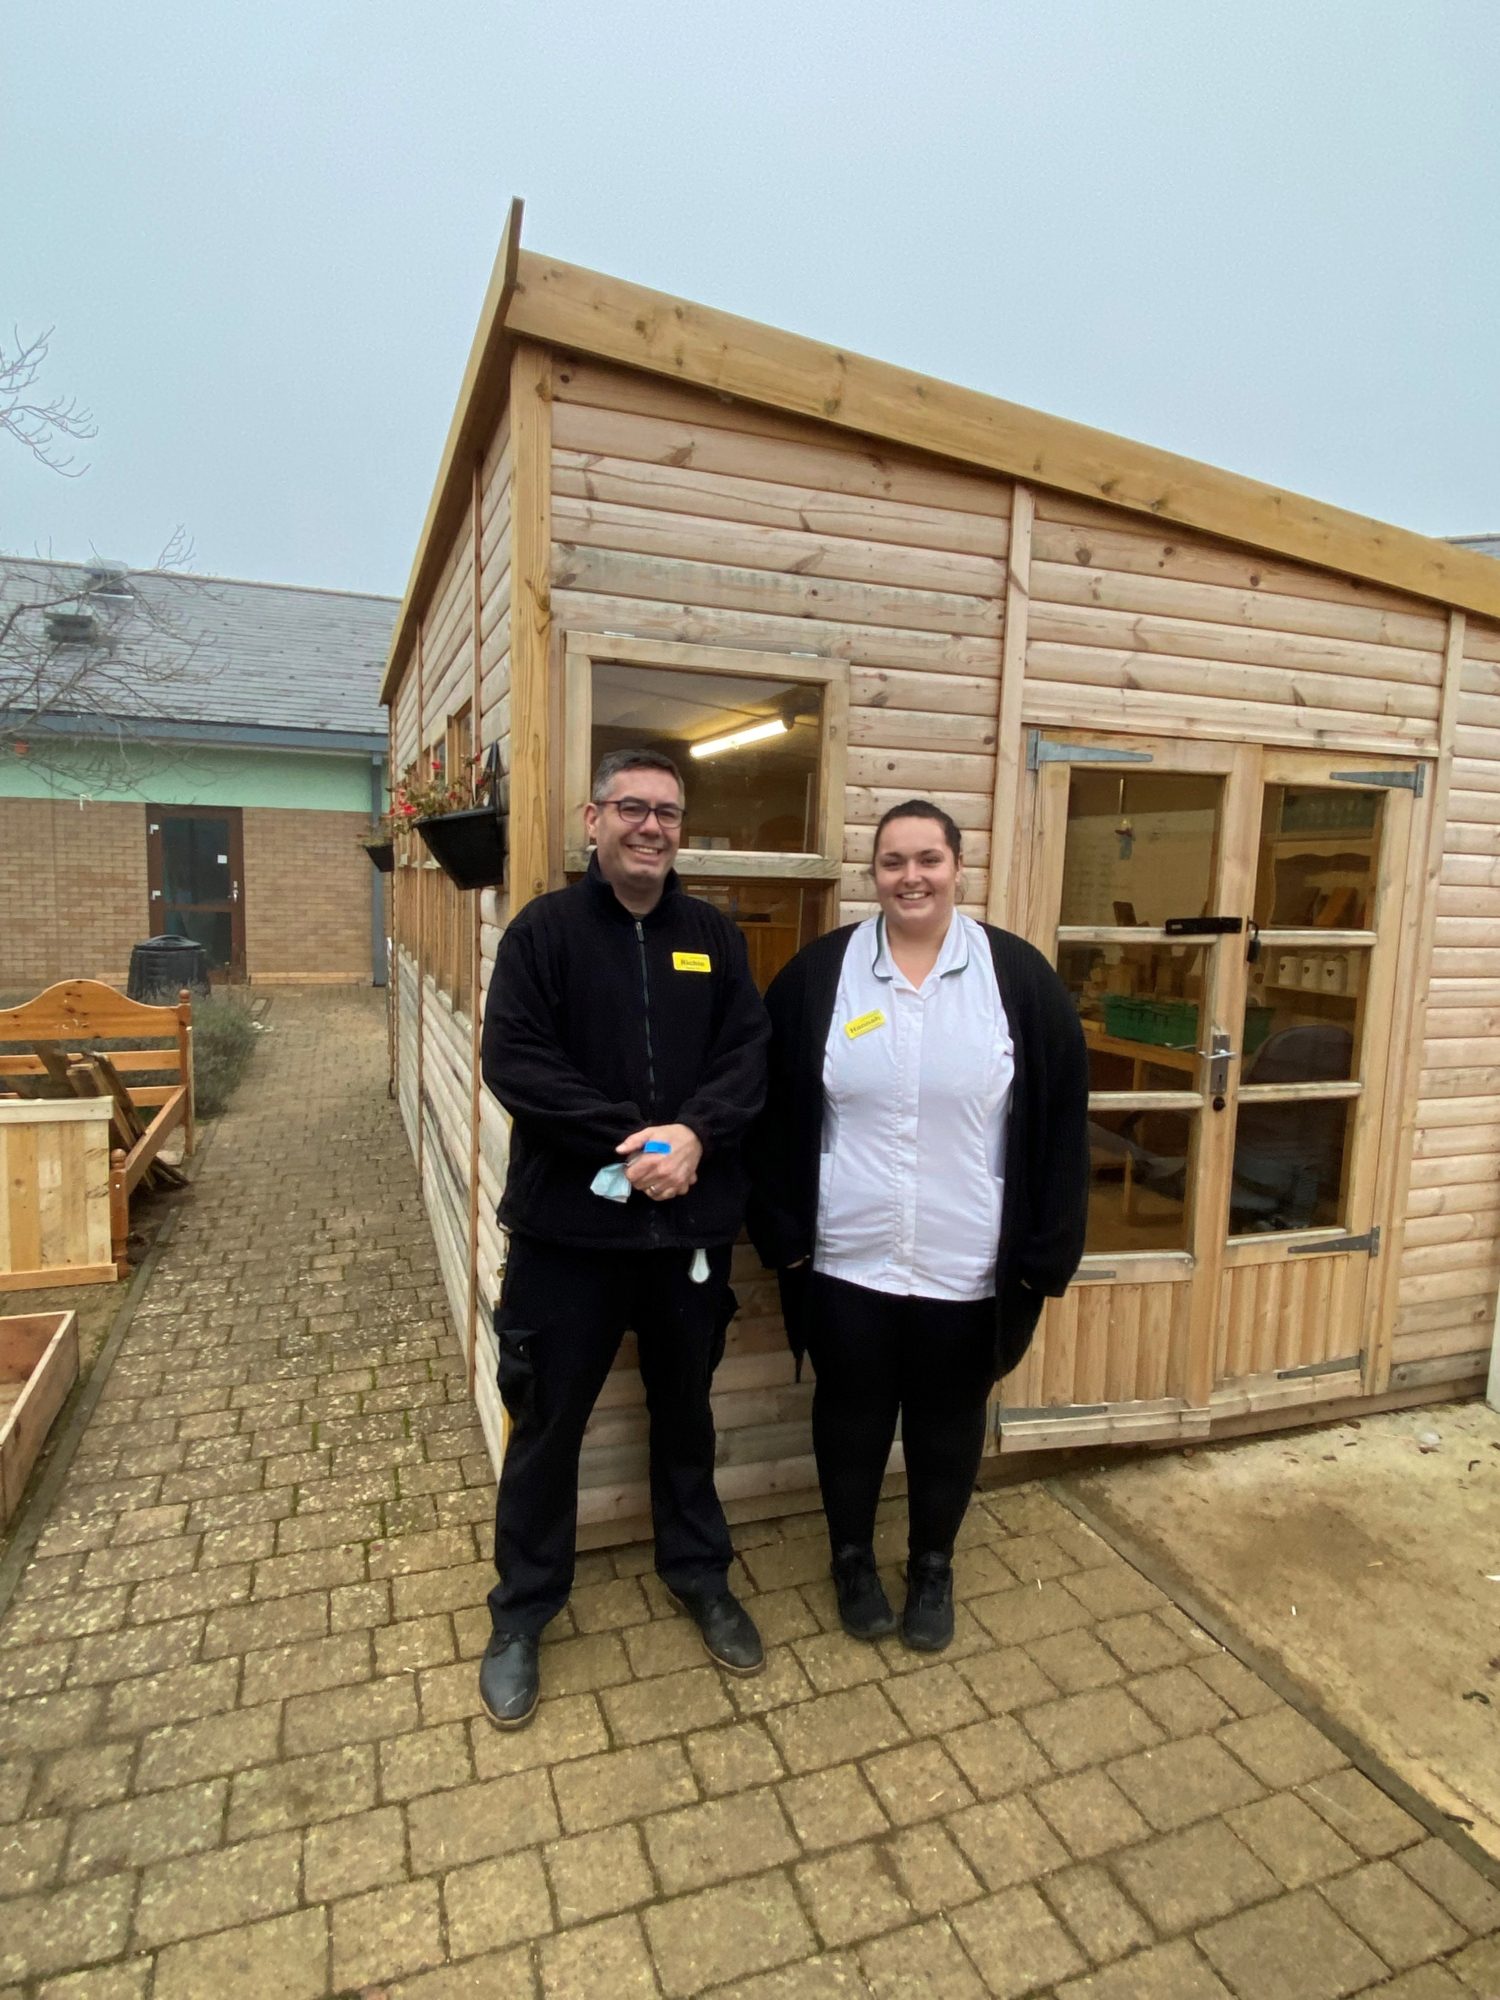 A shed at Berrywood Hospital funded by Northamptonshire Health Charity is providing amazing benefits to patients with mental health conditions